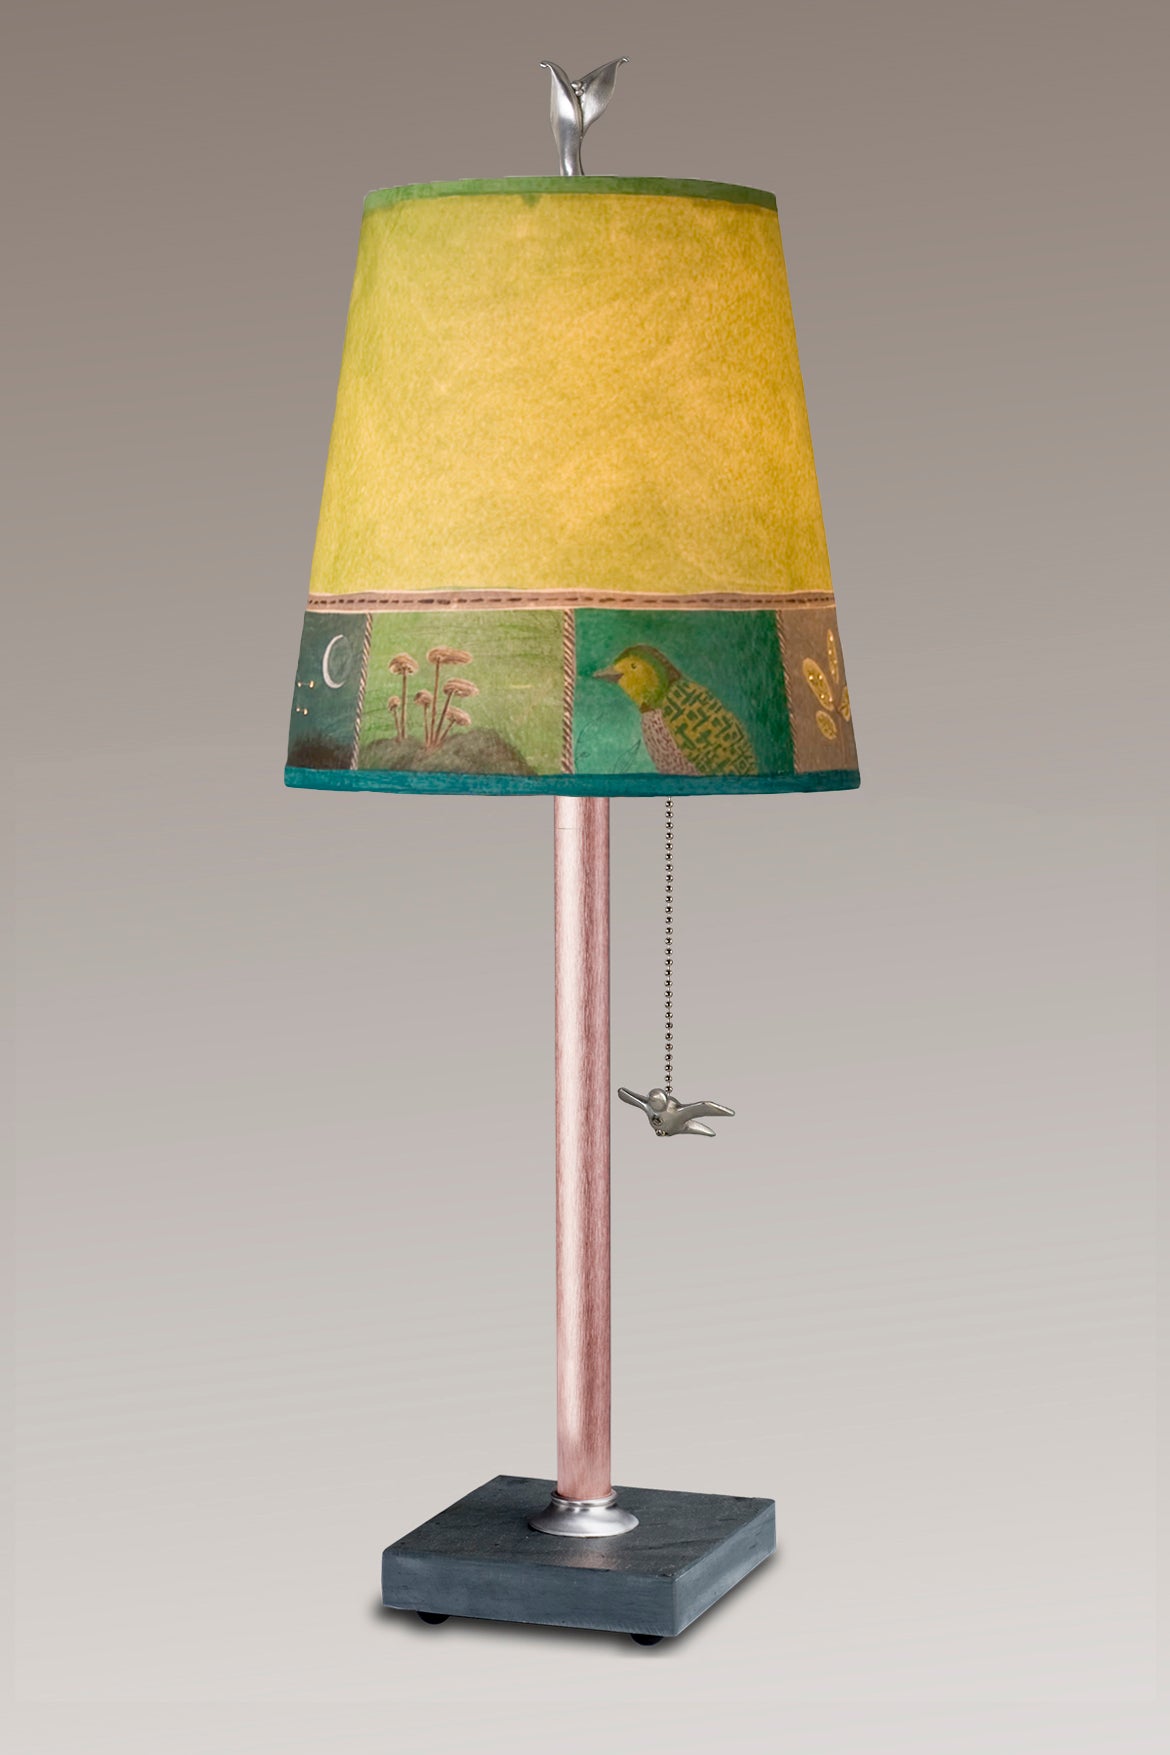 Janna Ugone & Co Table Lamps Copper Table Lamp with Small Drum in Woodland Trails in Leaf